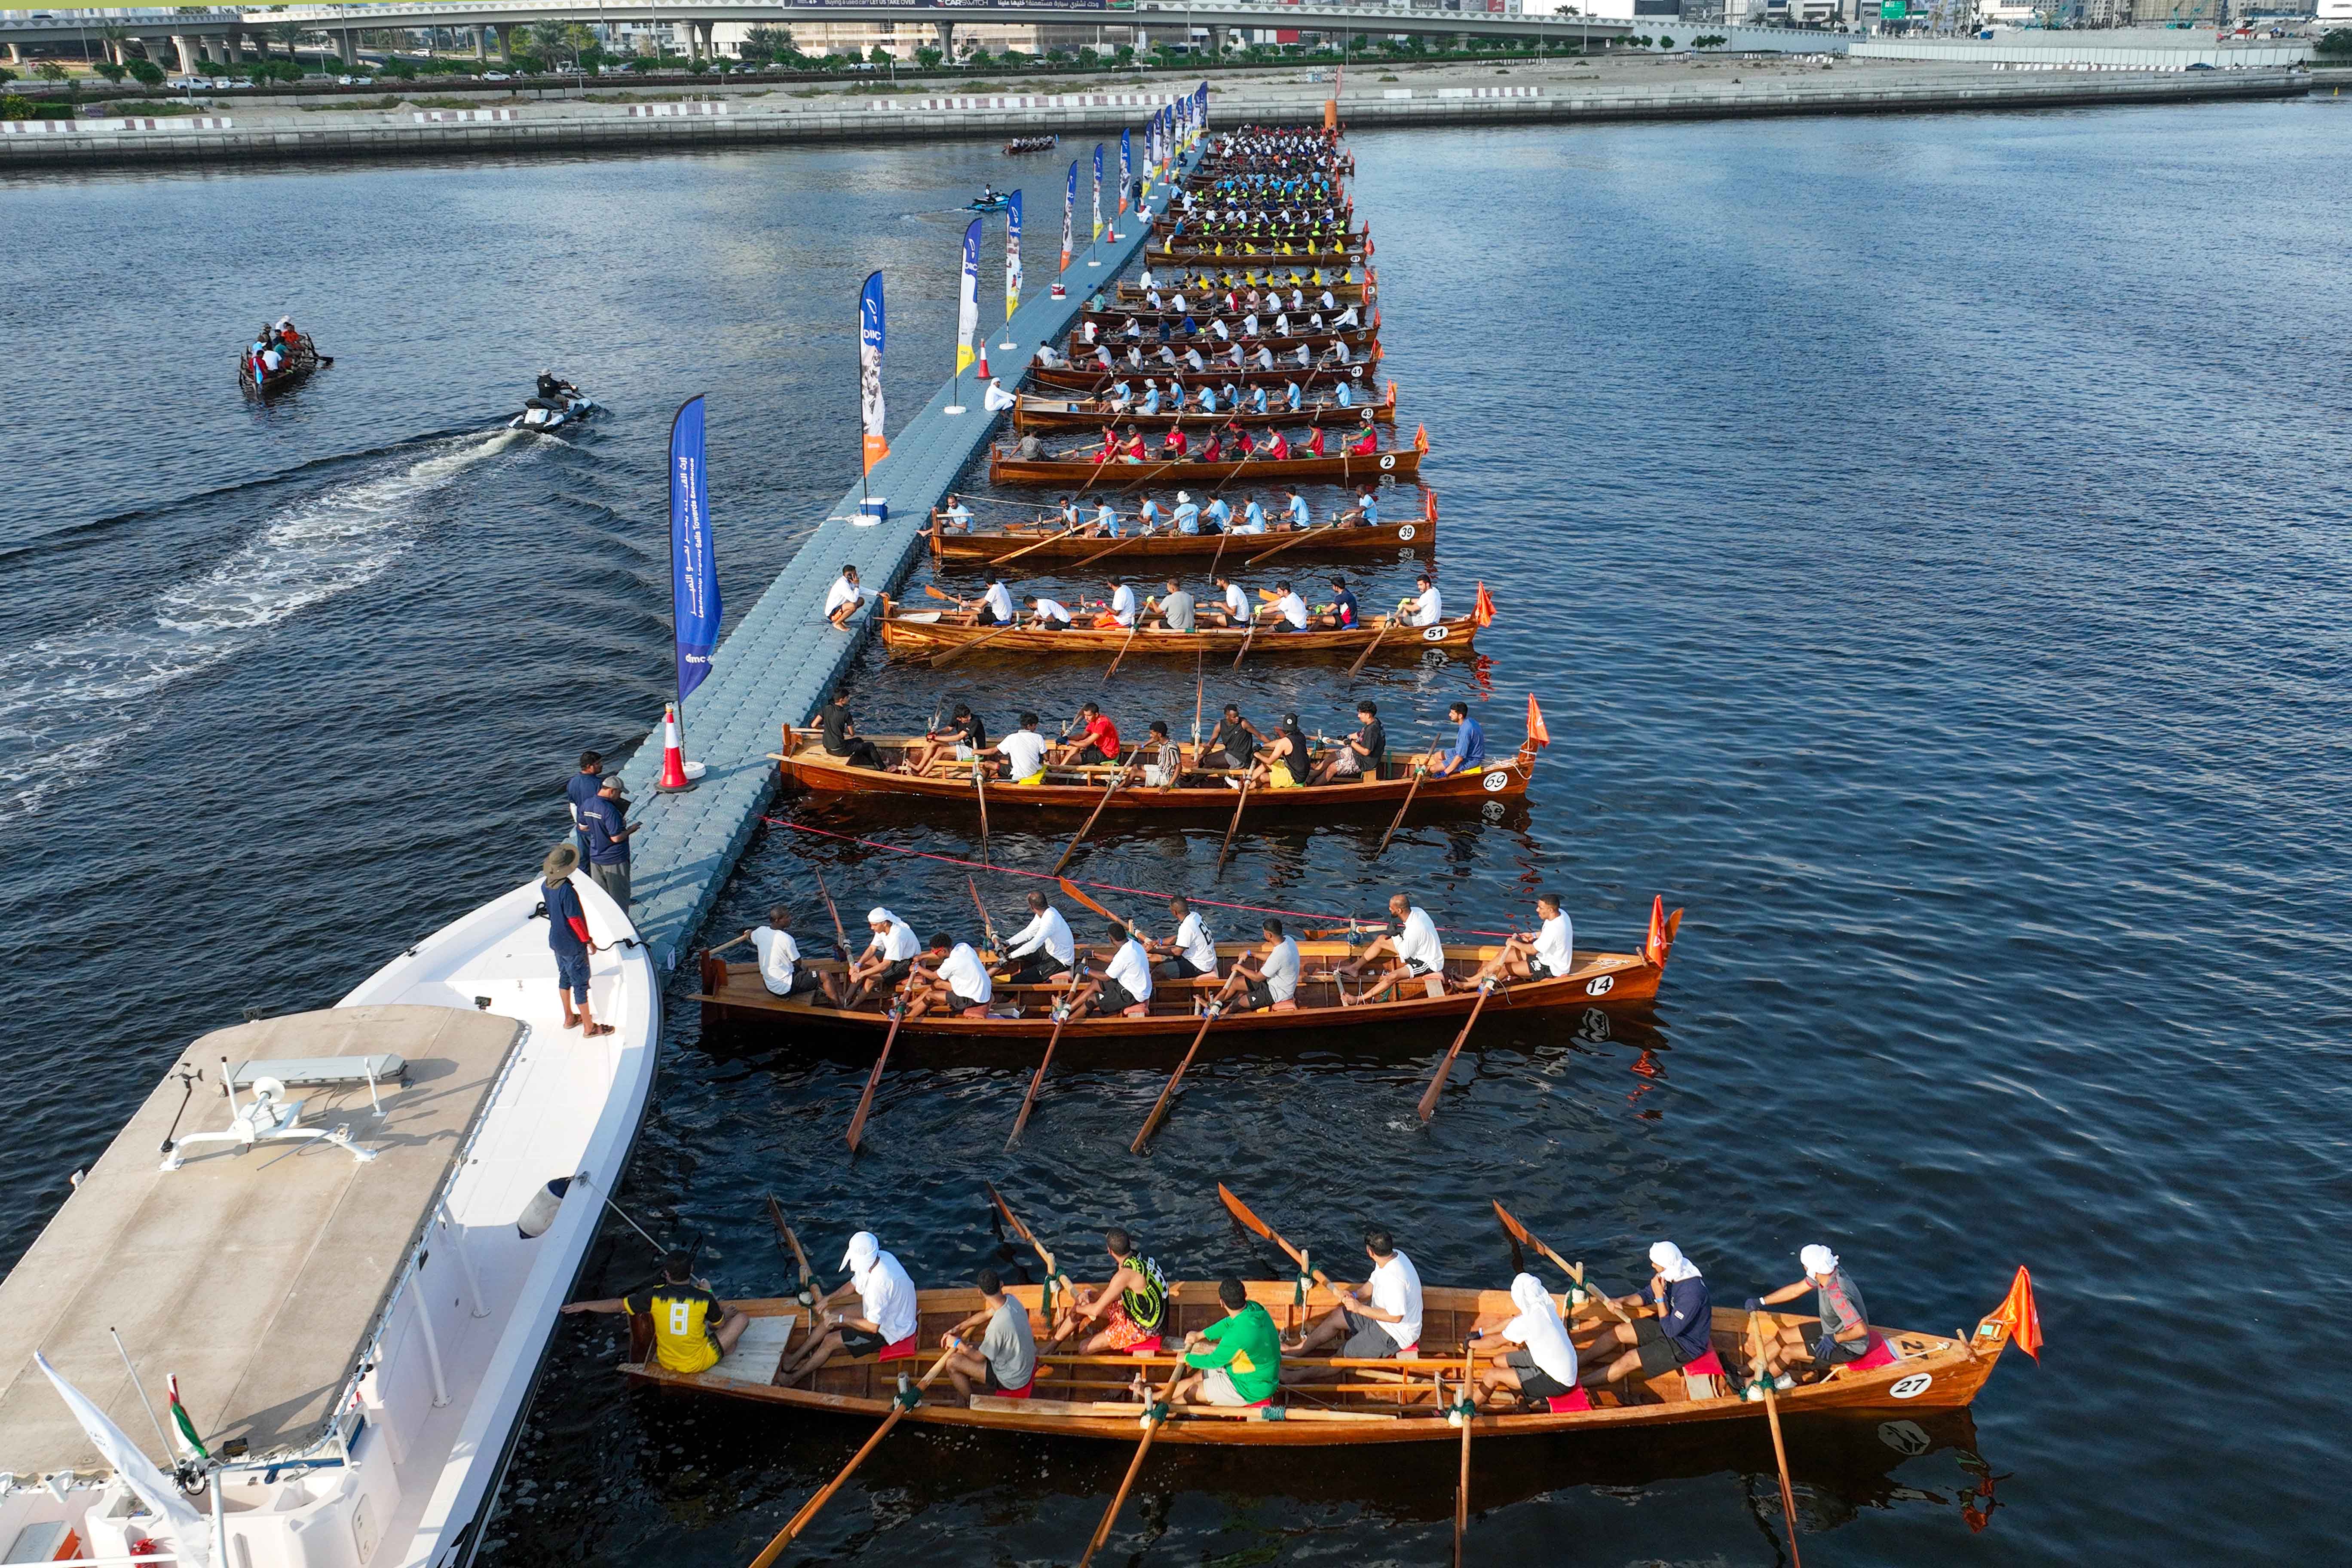 Second Round of Traditional Rowing Race on Saturday